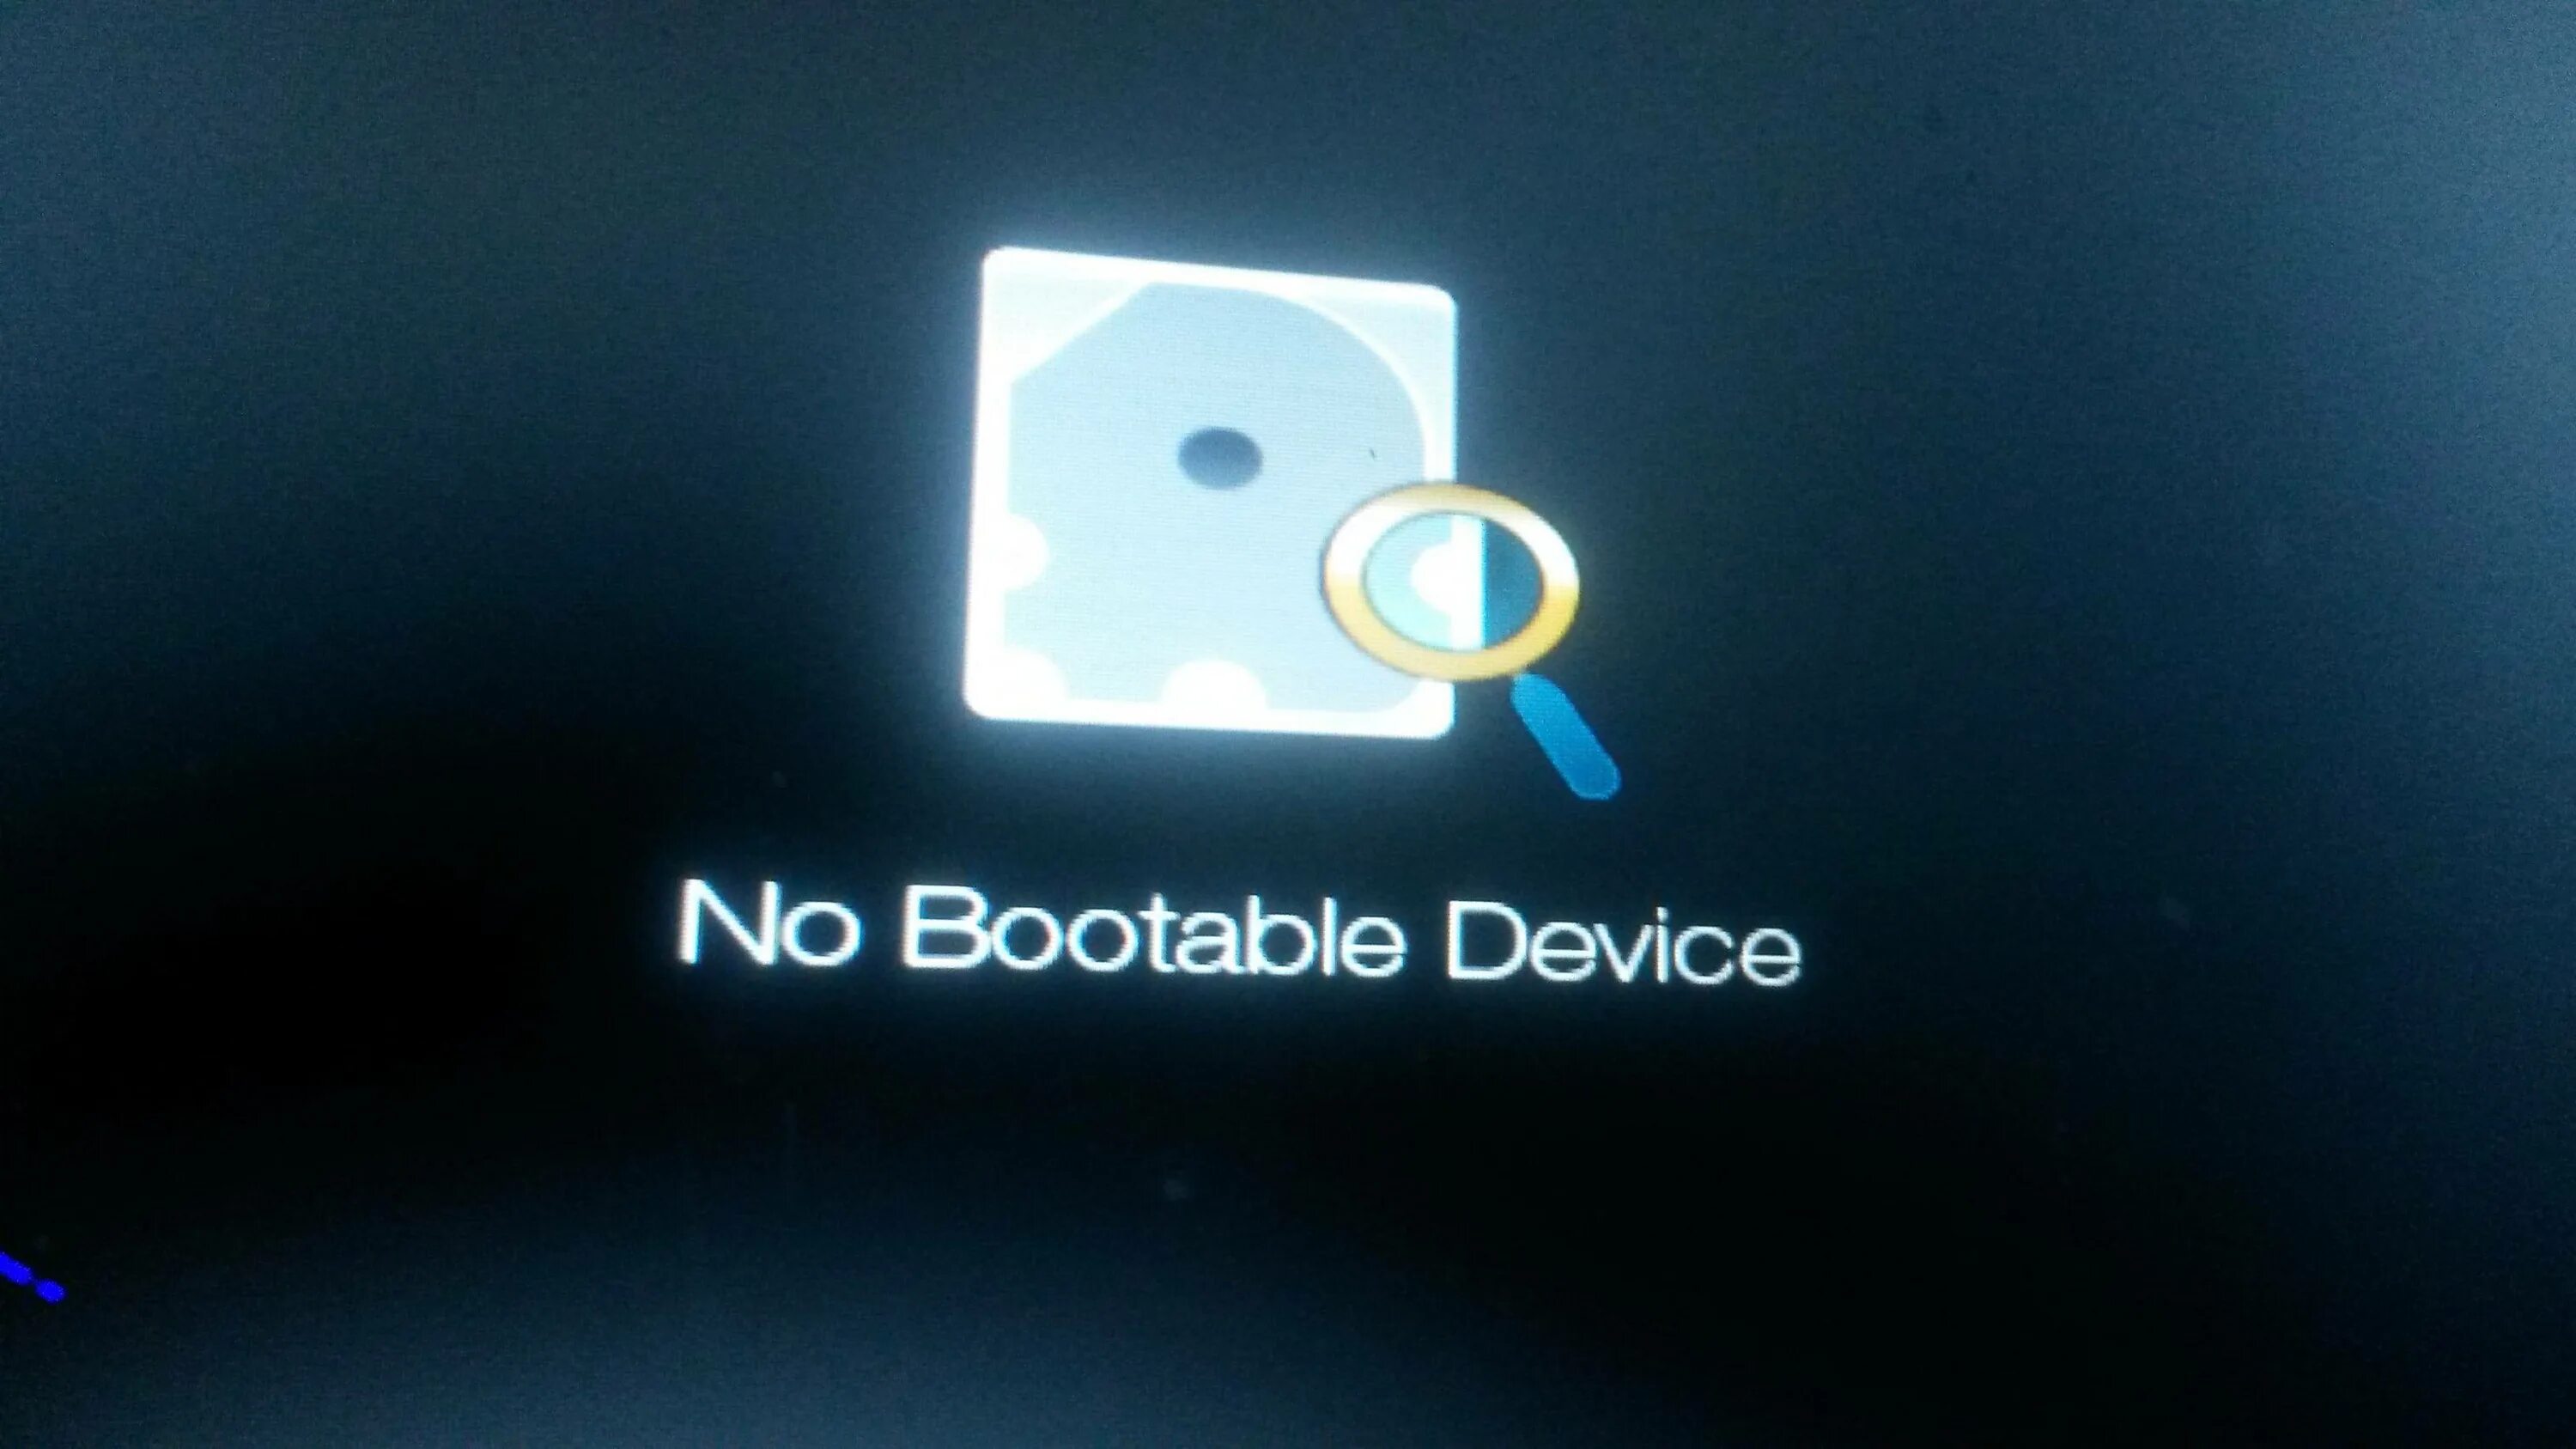 No Bootable device Acer. No Bootable device на ноутбуке. No Bootable device на ноутбуке Acer. No Bootable device на ноутбуке Acer Windows 10. No bootable system